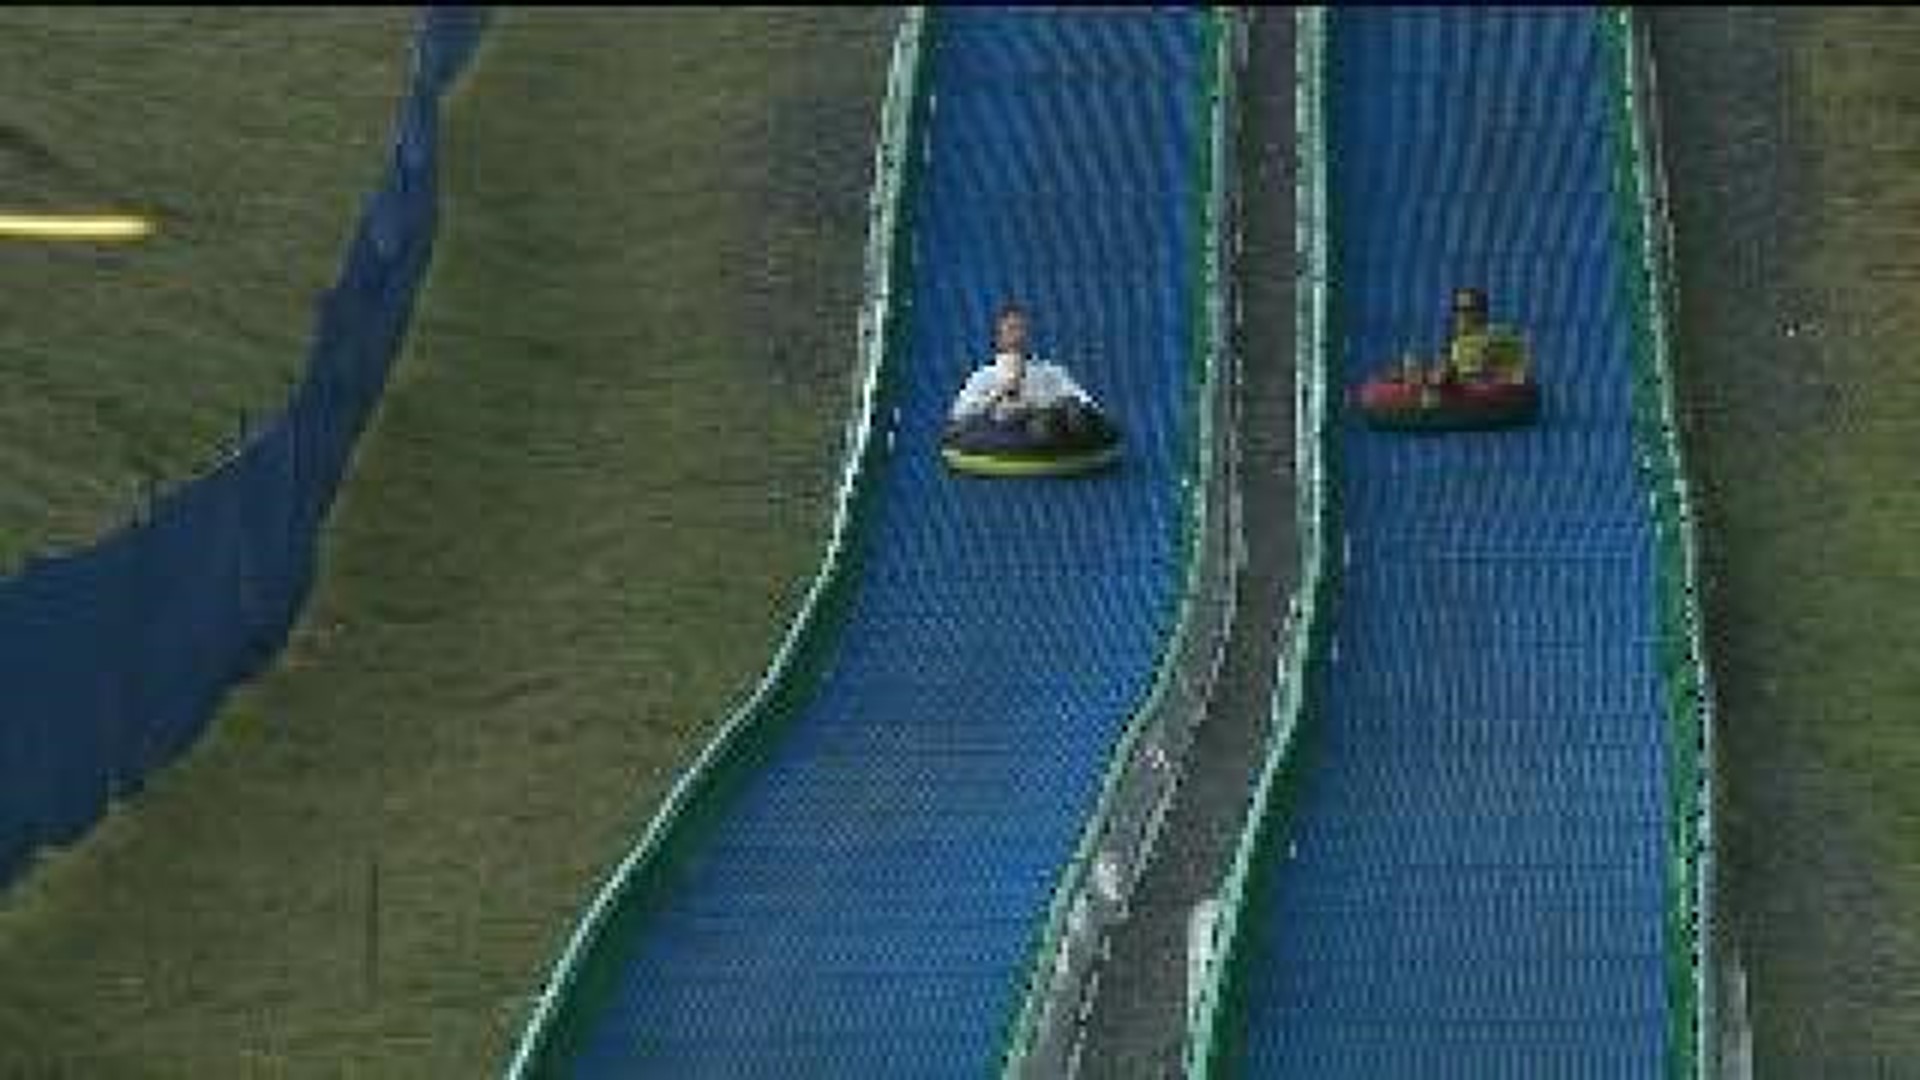 Snow Tubing...In The Summer?!